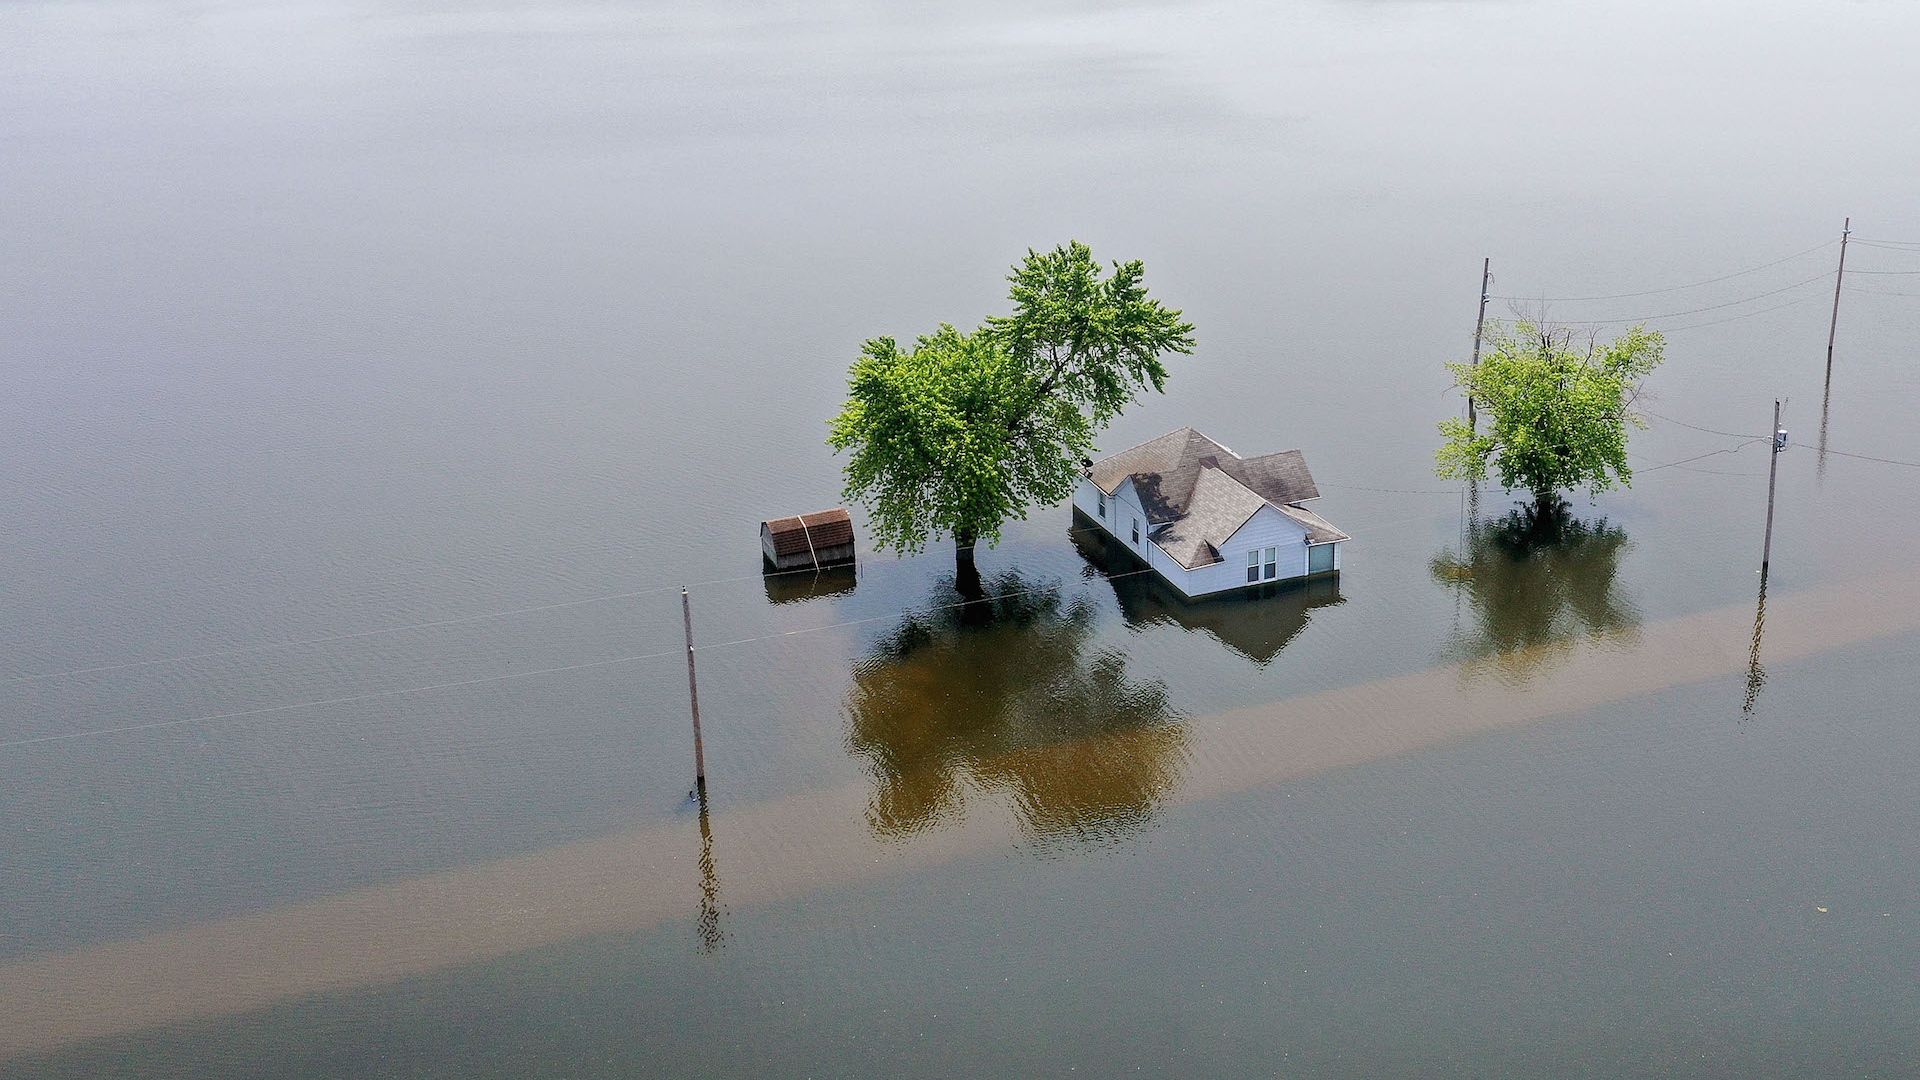 Flooded house near the Mississippi River.